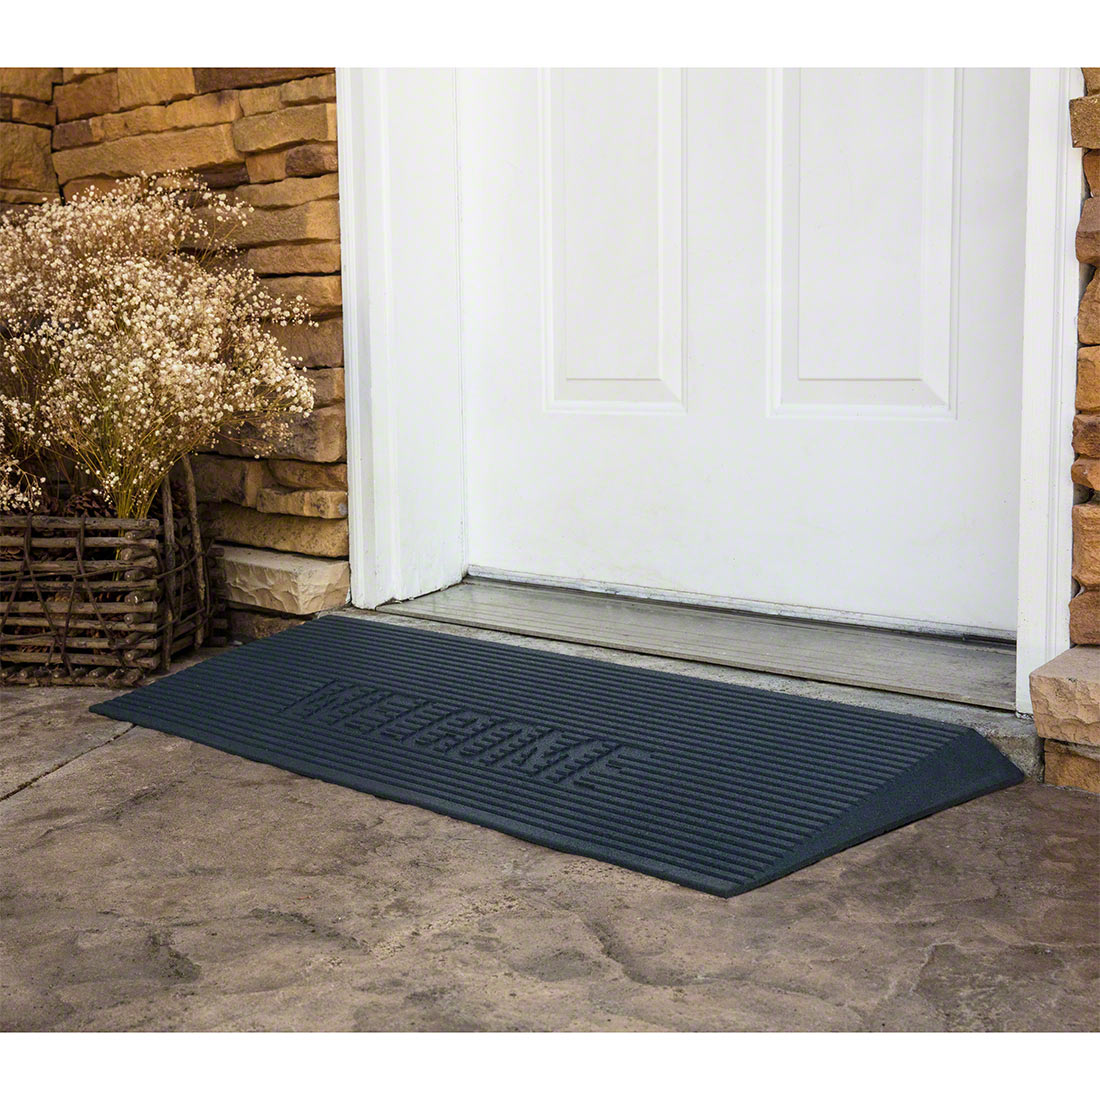 EZ-ACCESS Transitions Rubber Angled Entry Mat, Black, 1.5 Height